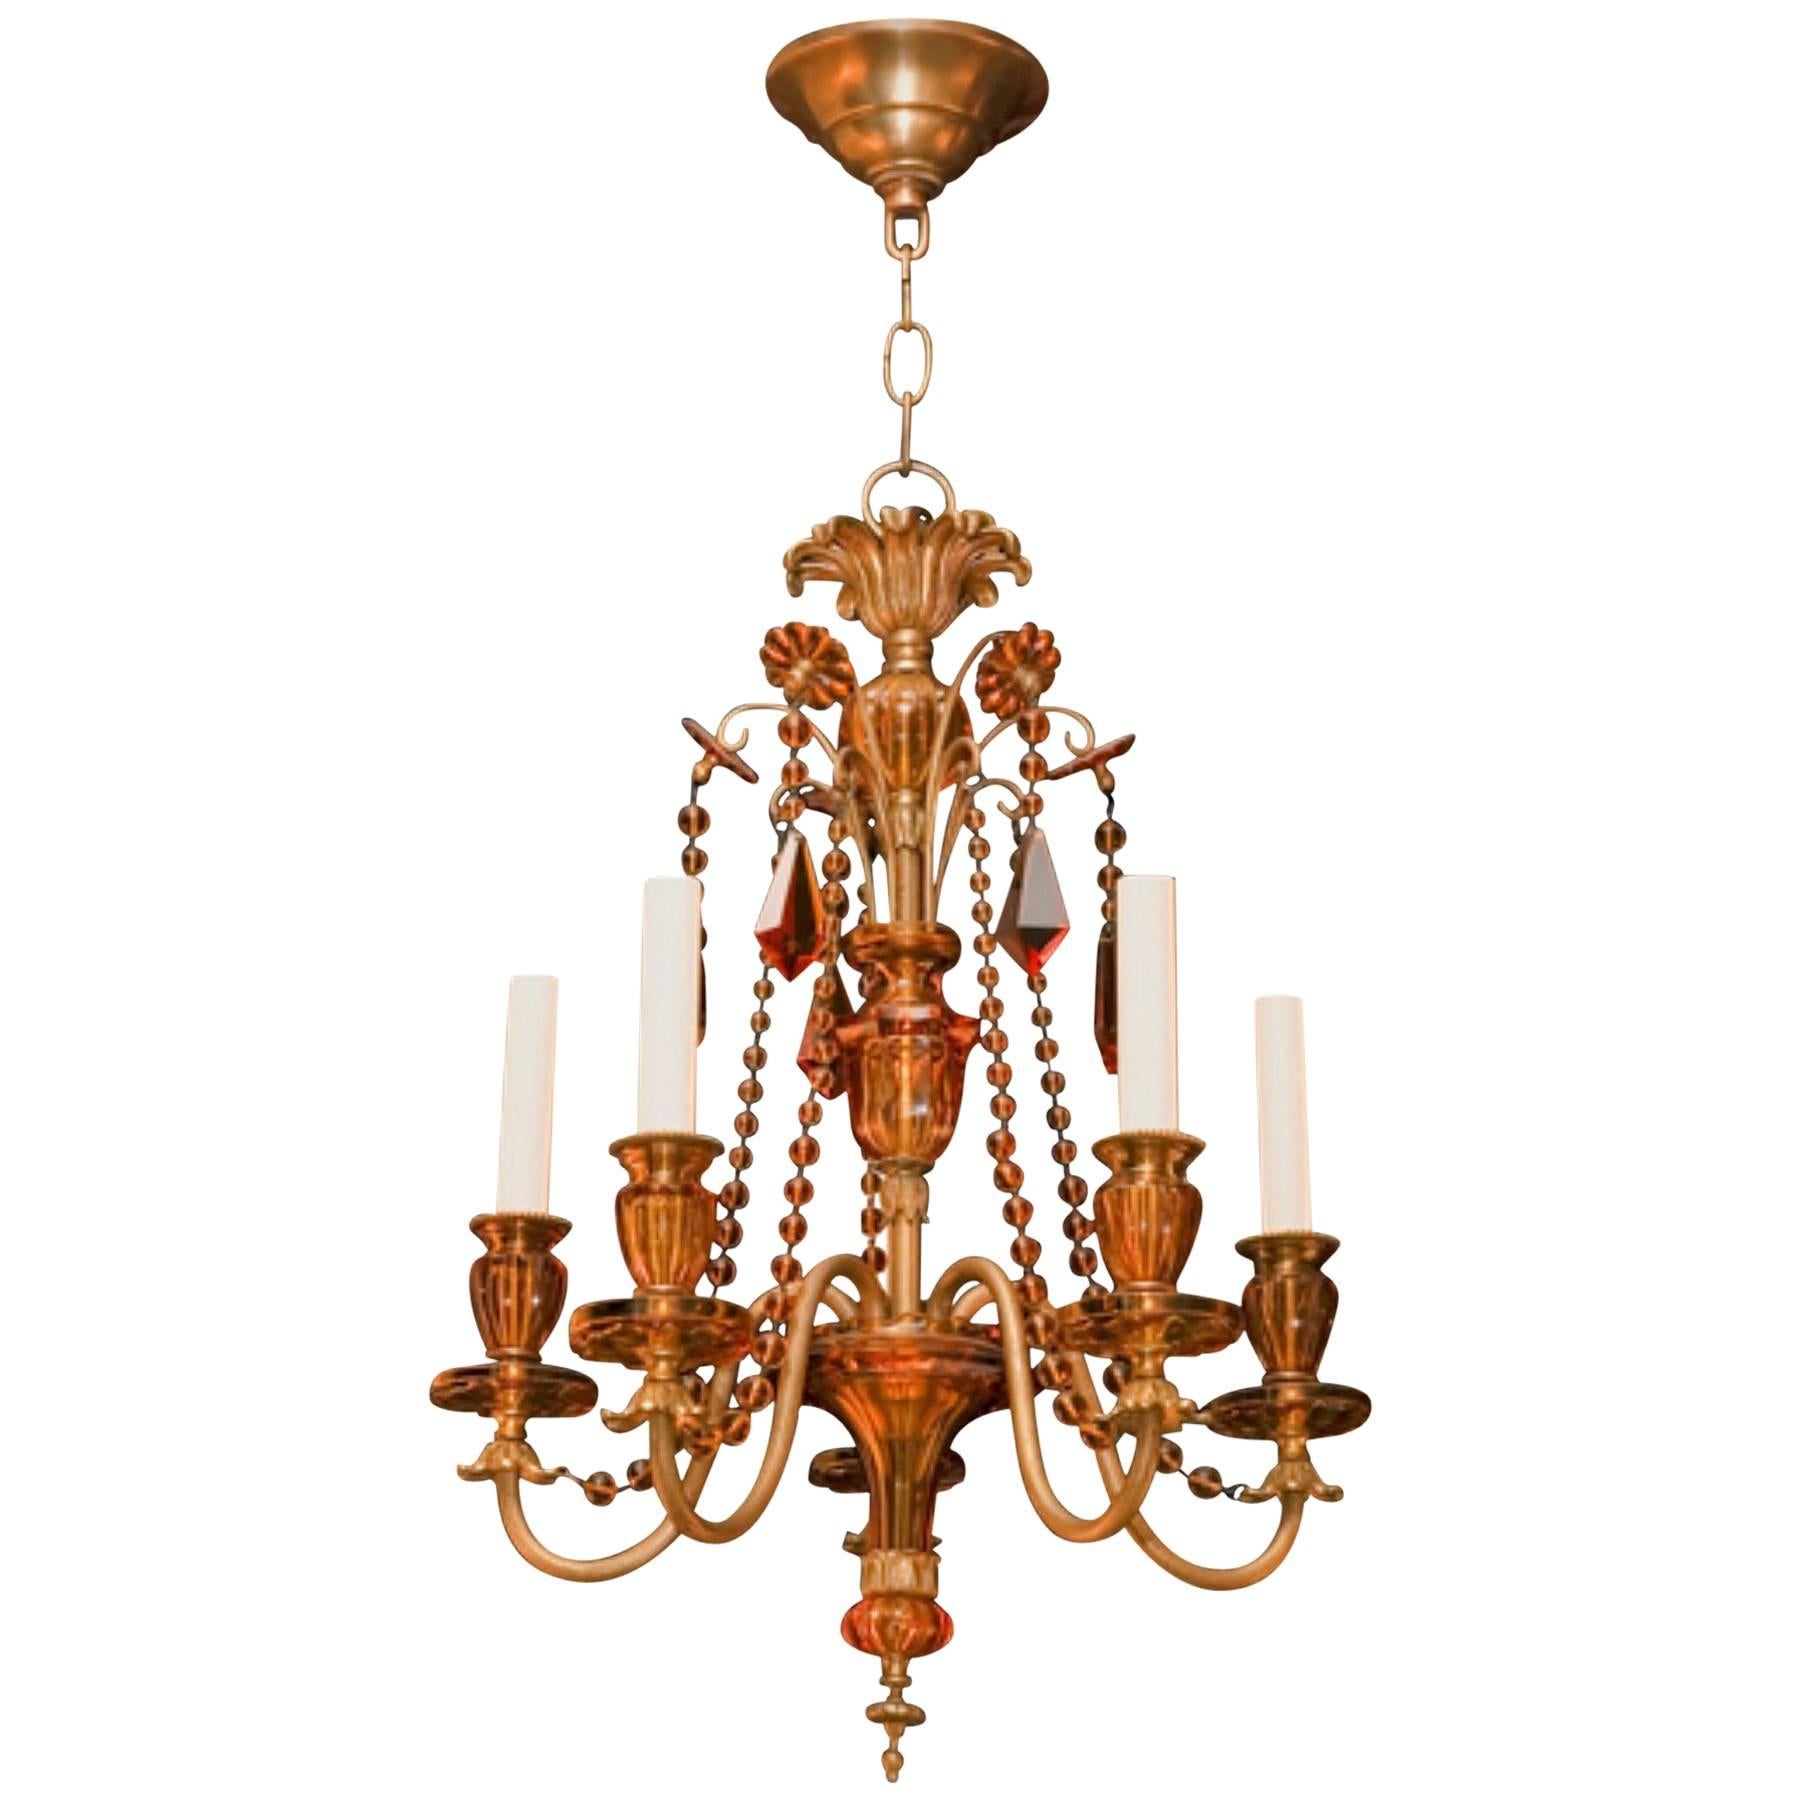 French Venetian Style Cut Amber Crystal and Bronze Chandelier with Five Arms